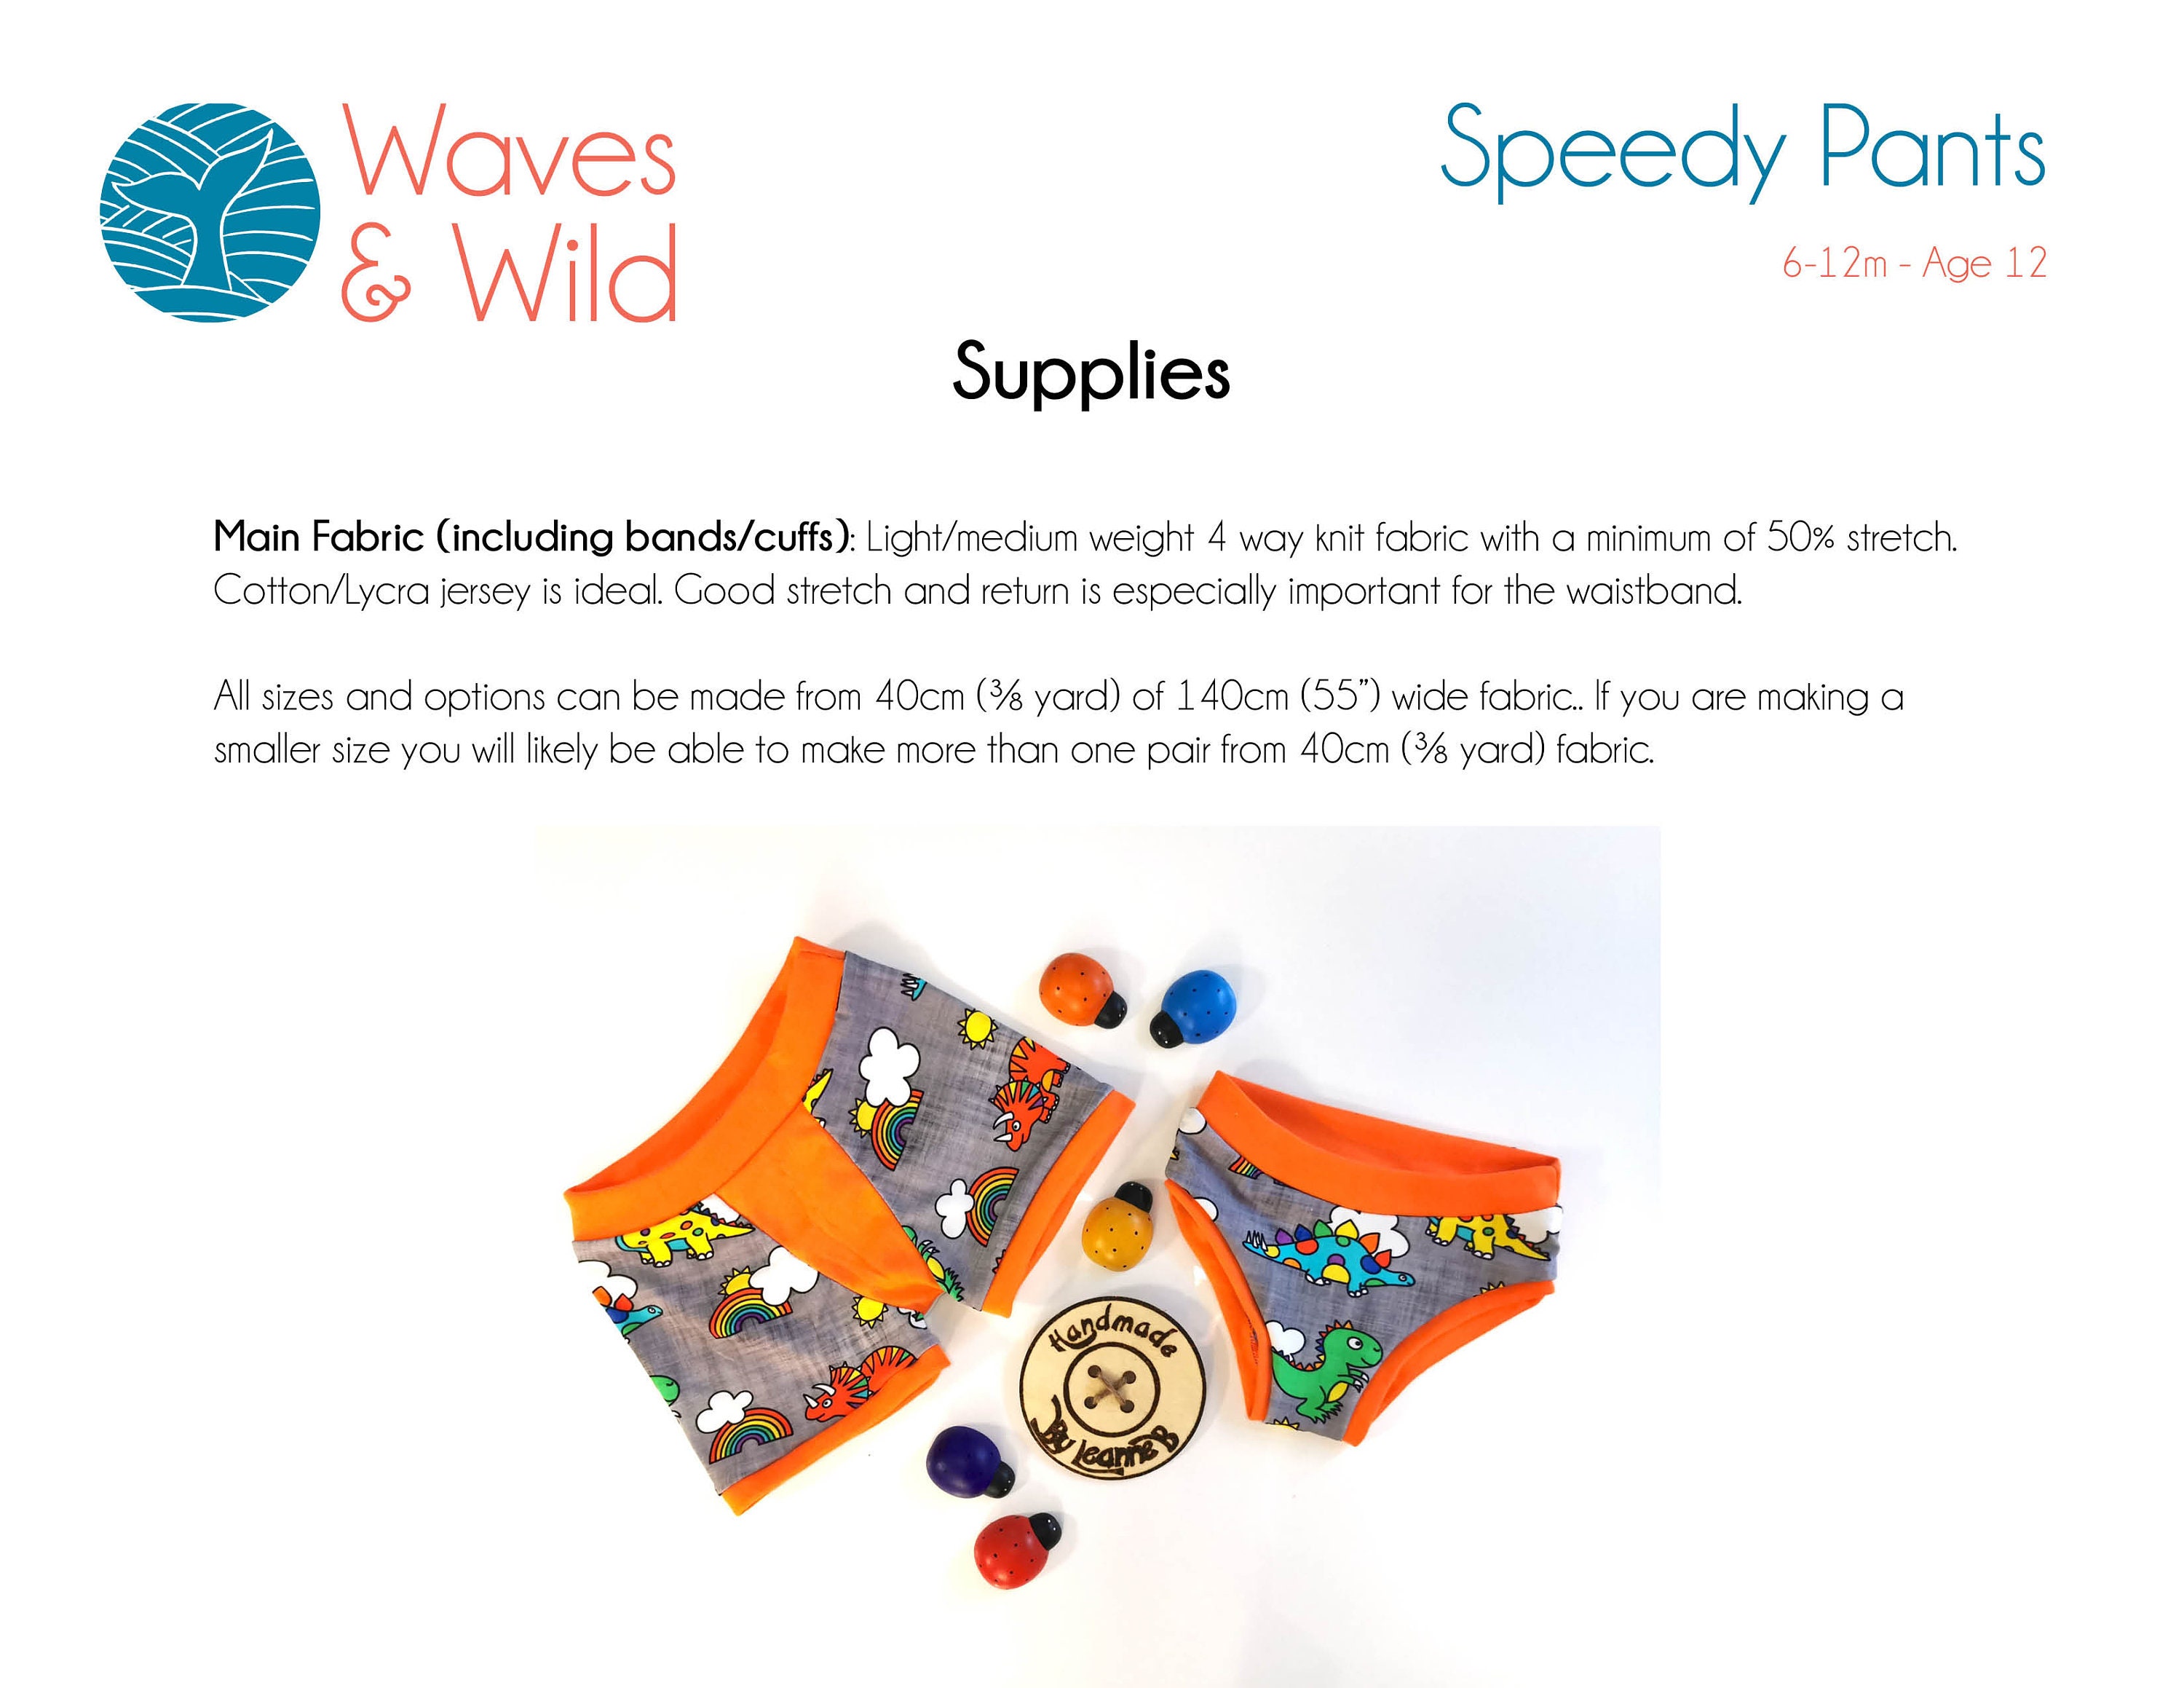 W&W Speedy Pants boxers and Briefs Digital Downloadable Sewing